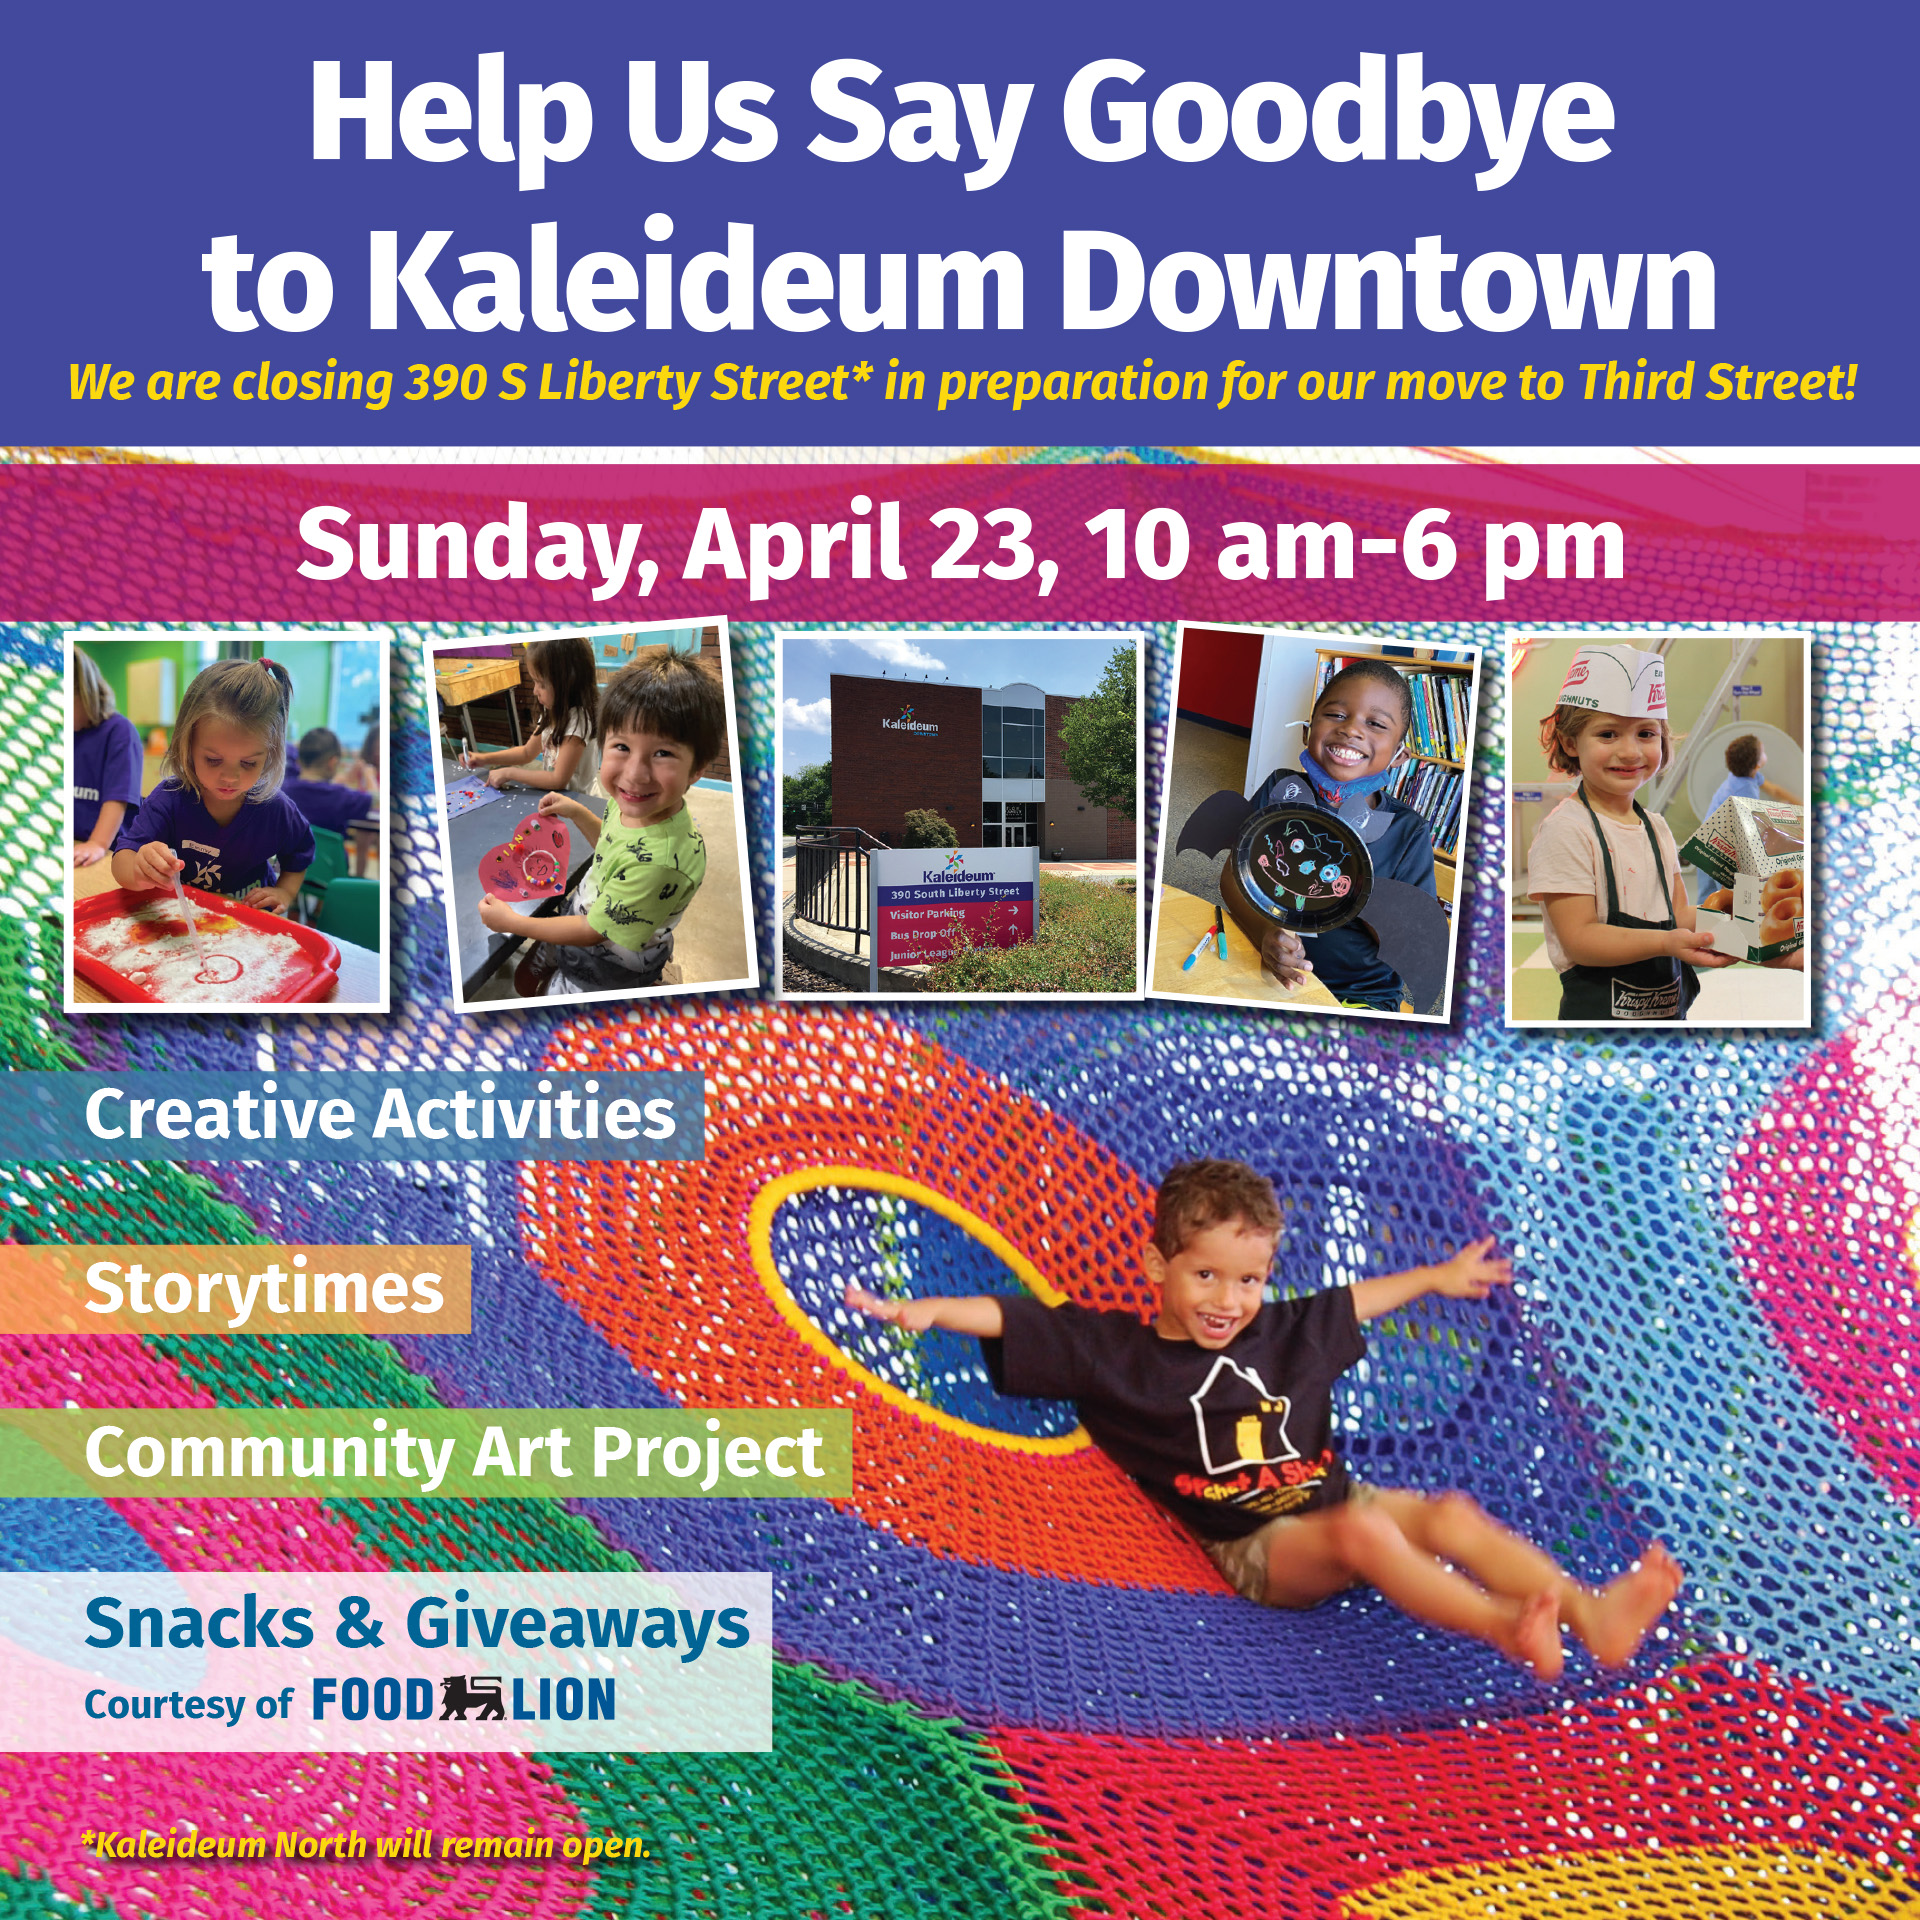 Help Us Say Goodbye to Kaleideum Downtown We are closing 390 S Liberty Street* in preparation for our move to Third Street! Sunday, April 23, 10 am-6 pm Creative Activities Storytimes Community Art Project Snacks & Giveaways Courtesy of Food Lion *Kaleideum North will remain open.